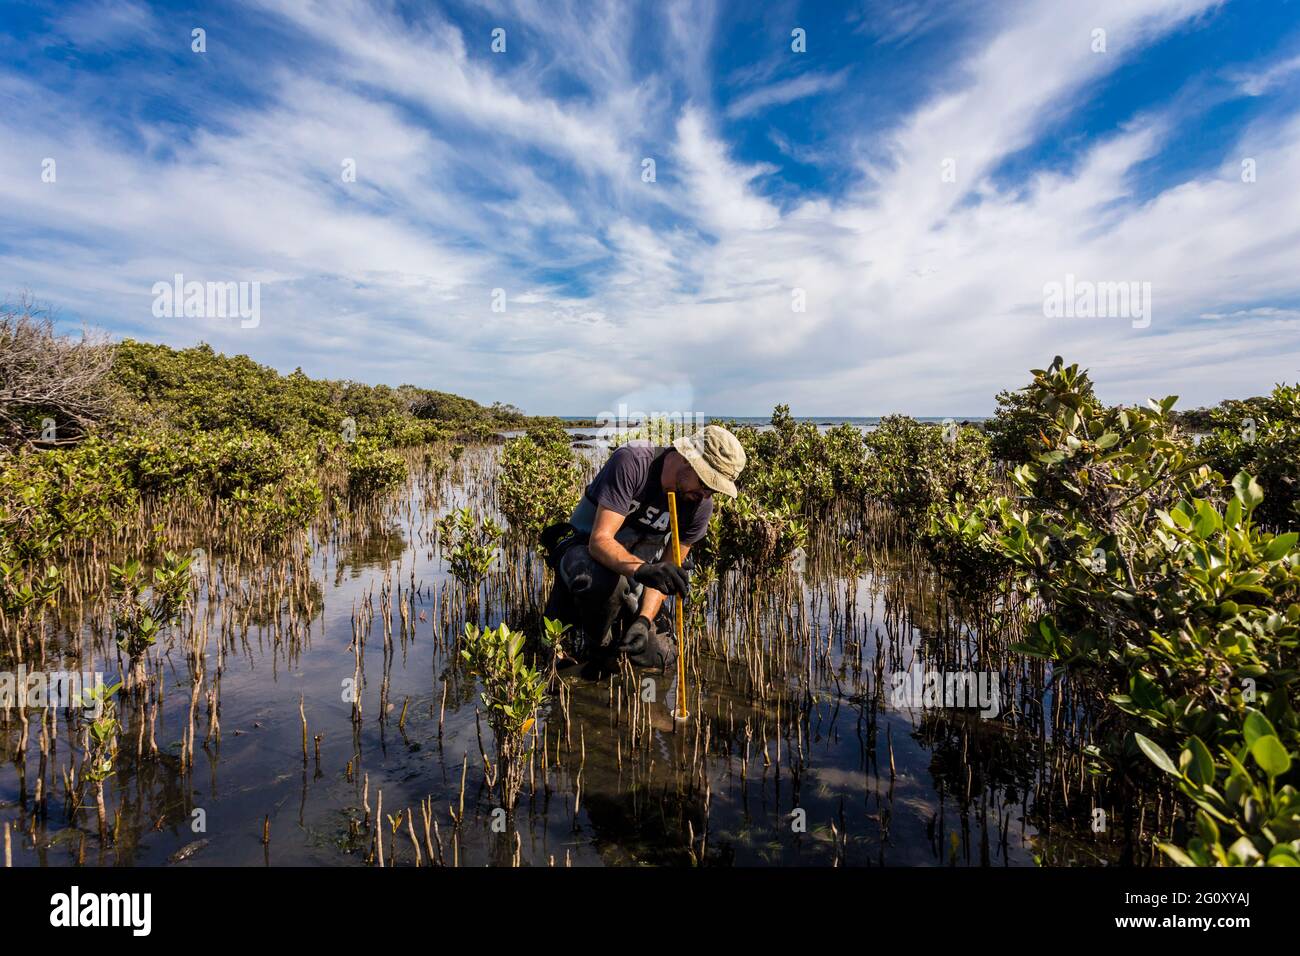 Scientist collecting a sediment core to asses carbon sequestration rates in the sediment of mangroves. Stock Photo